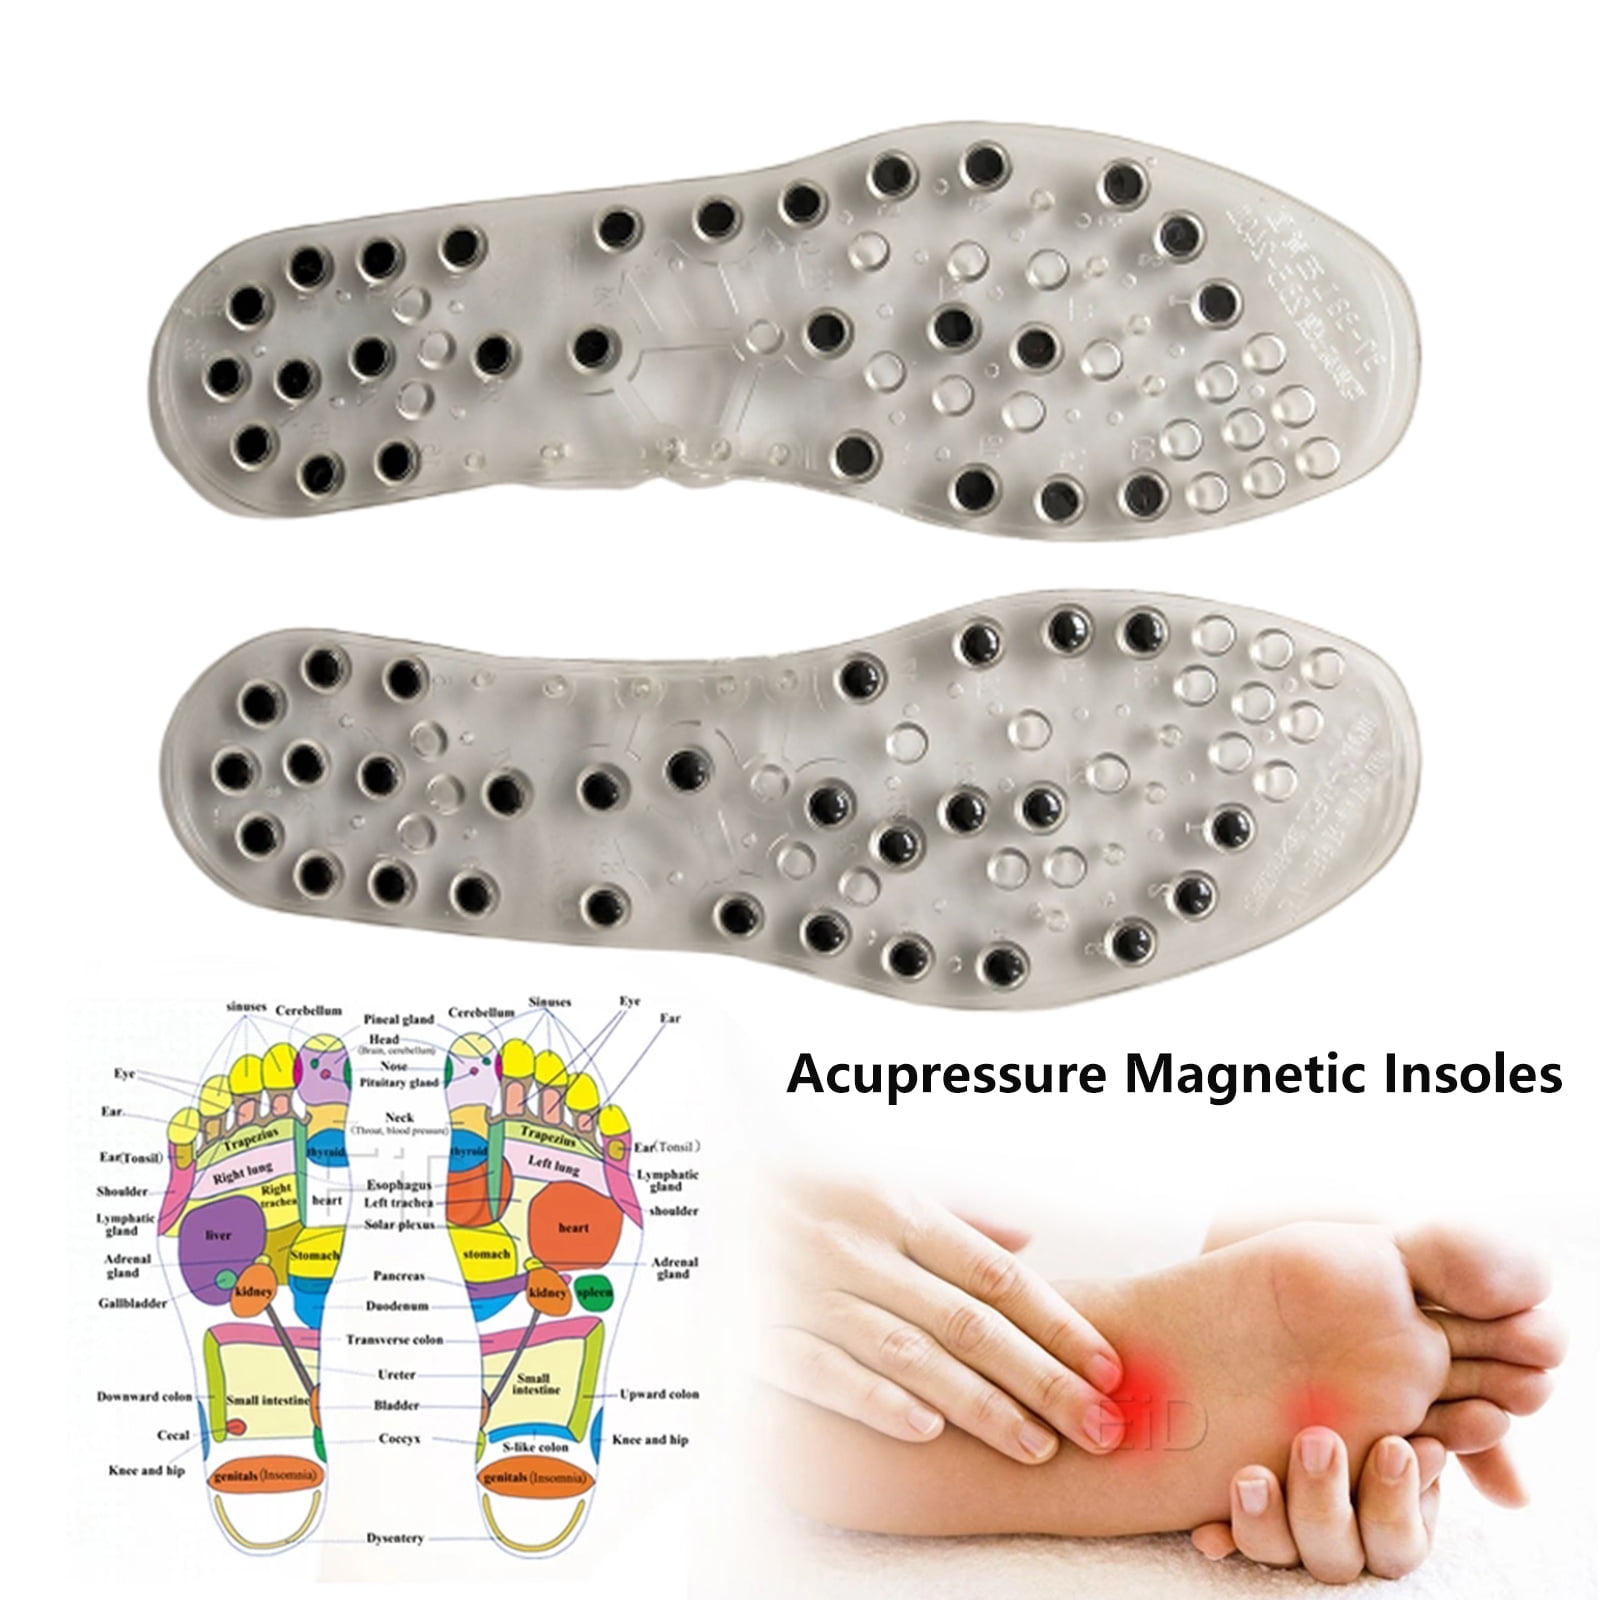 Acupressure Magnetic Massage Foot Therapy Reflexology Pain Relief Shoe Insoles 